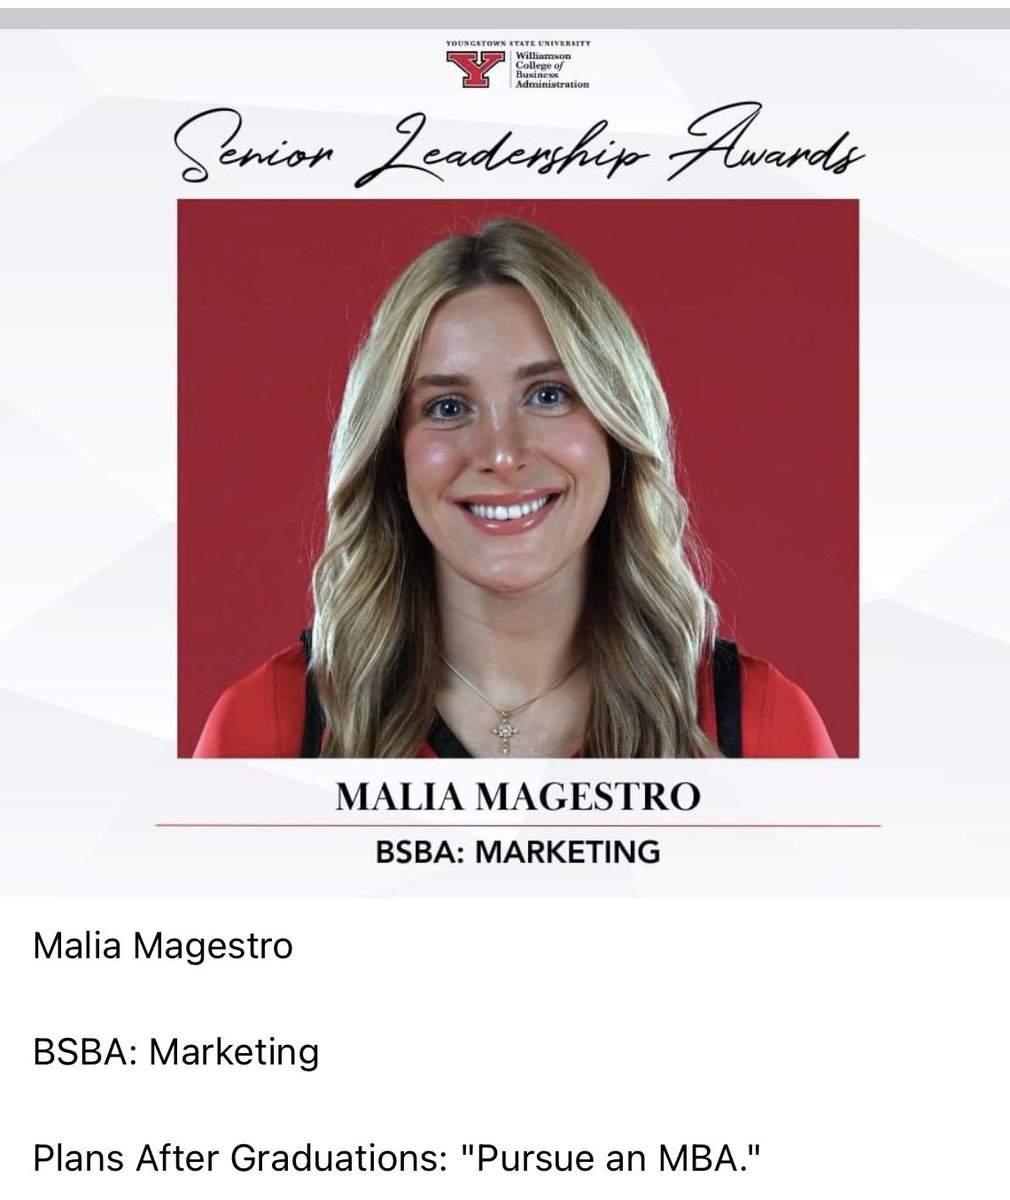 BIG congrats to @maliamagestro on this great leadership honor! ! ❤️🐧📚🗣️